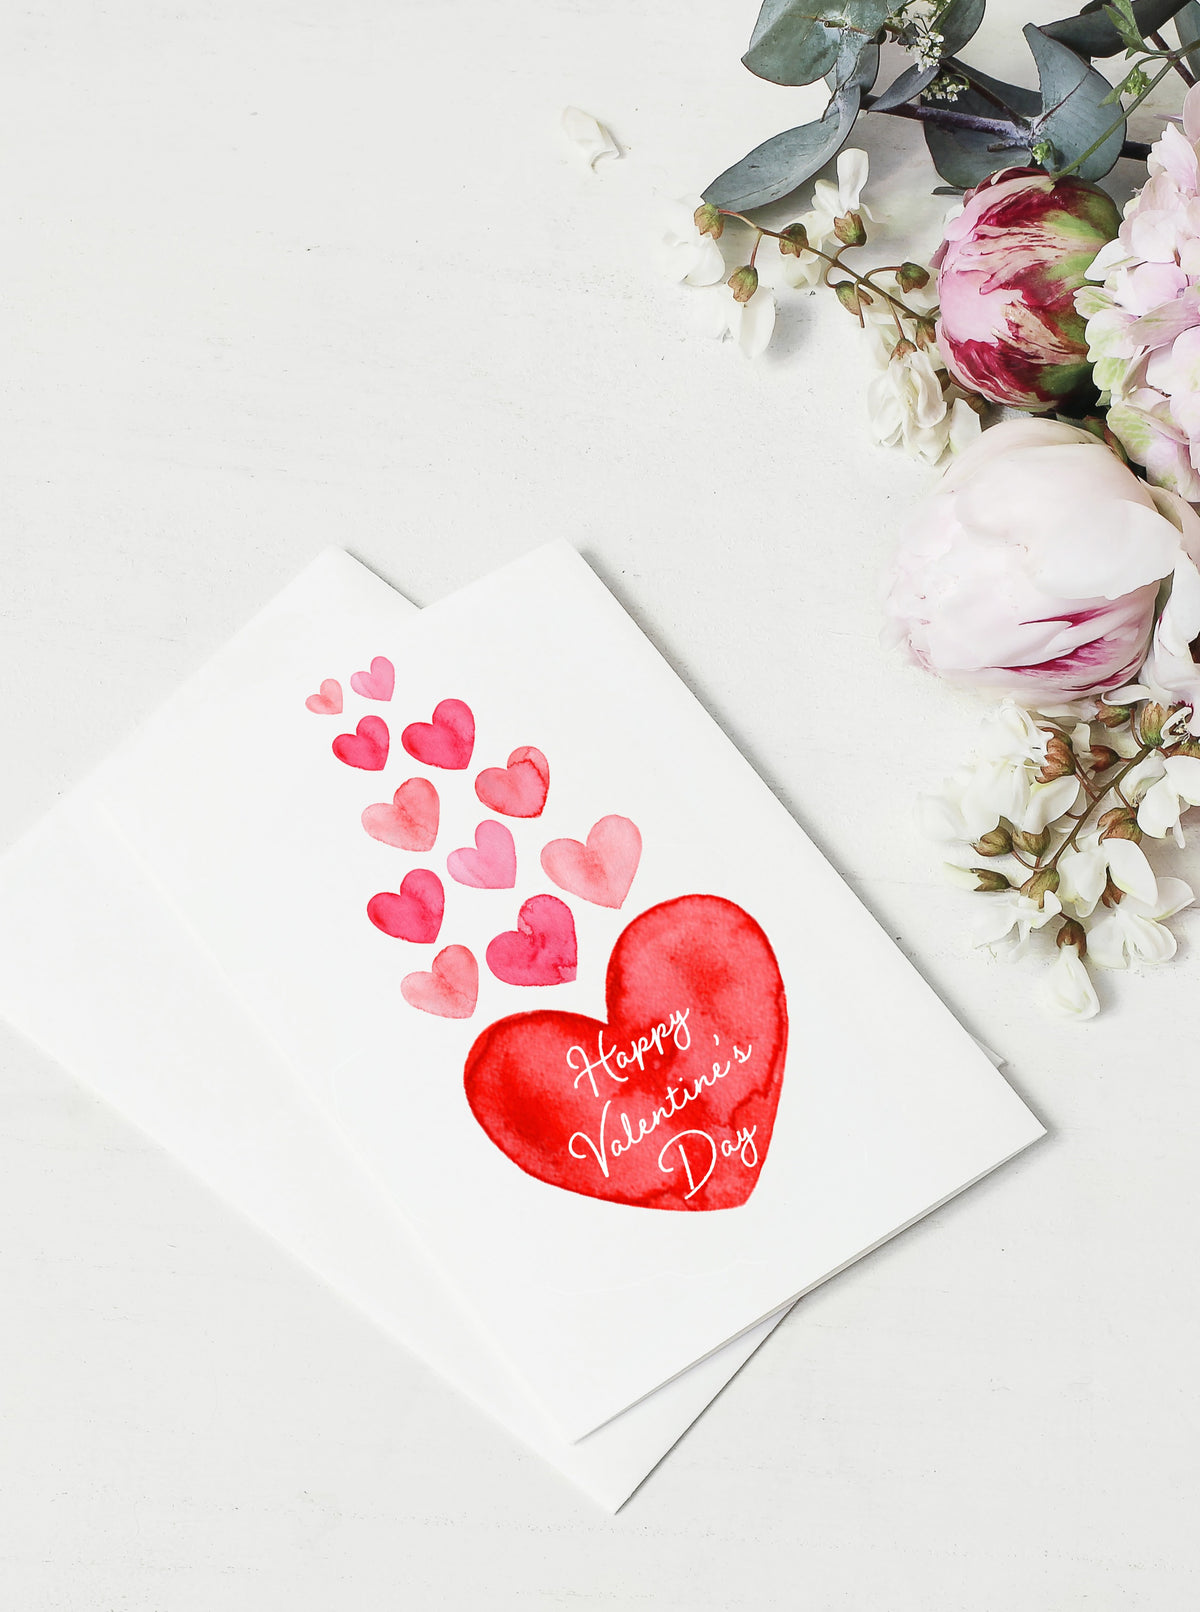 Happy Valentine's Day Hearts Card Set,Galentines Day Card for friend,Happy Valentine's Day Pink Heart Card Set,VDay Card for Her,Made in USA